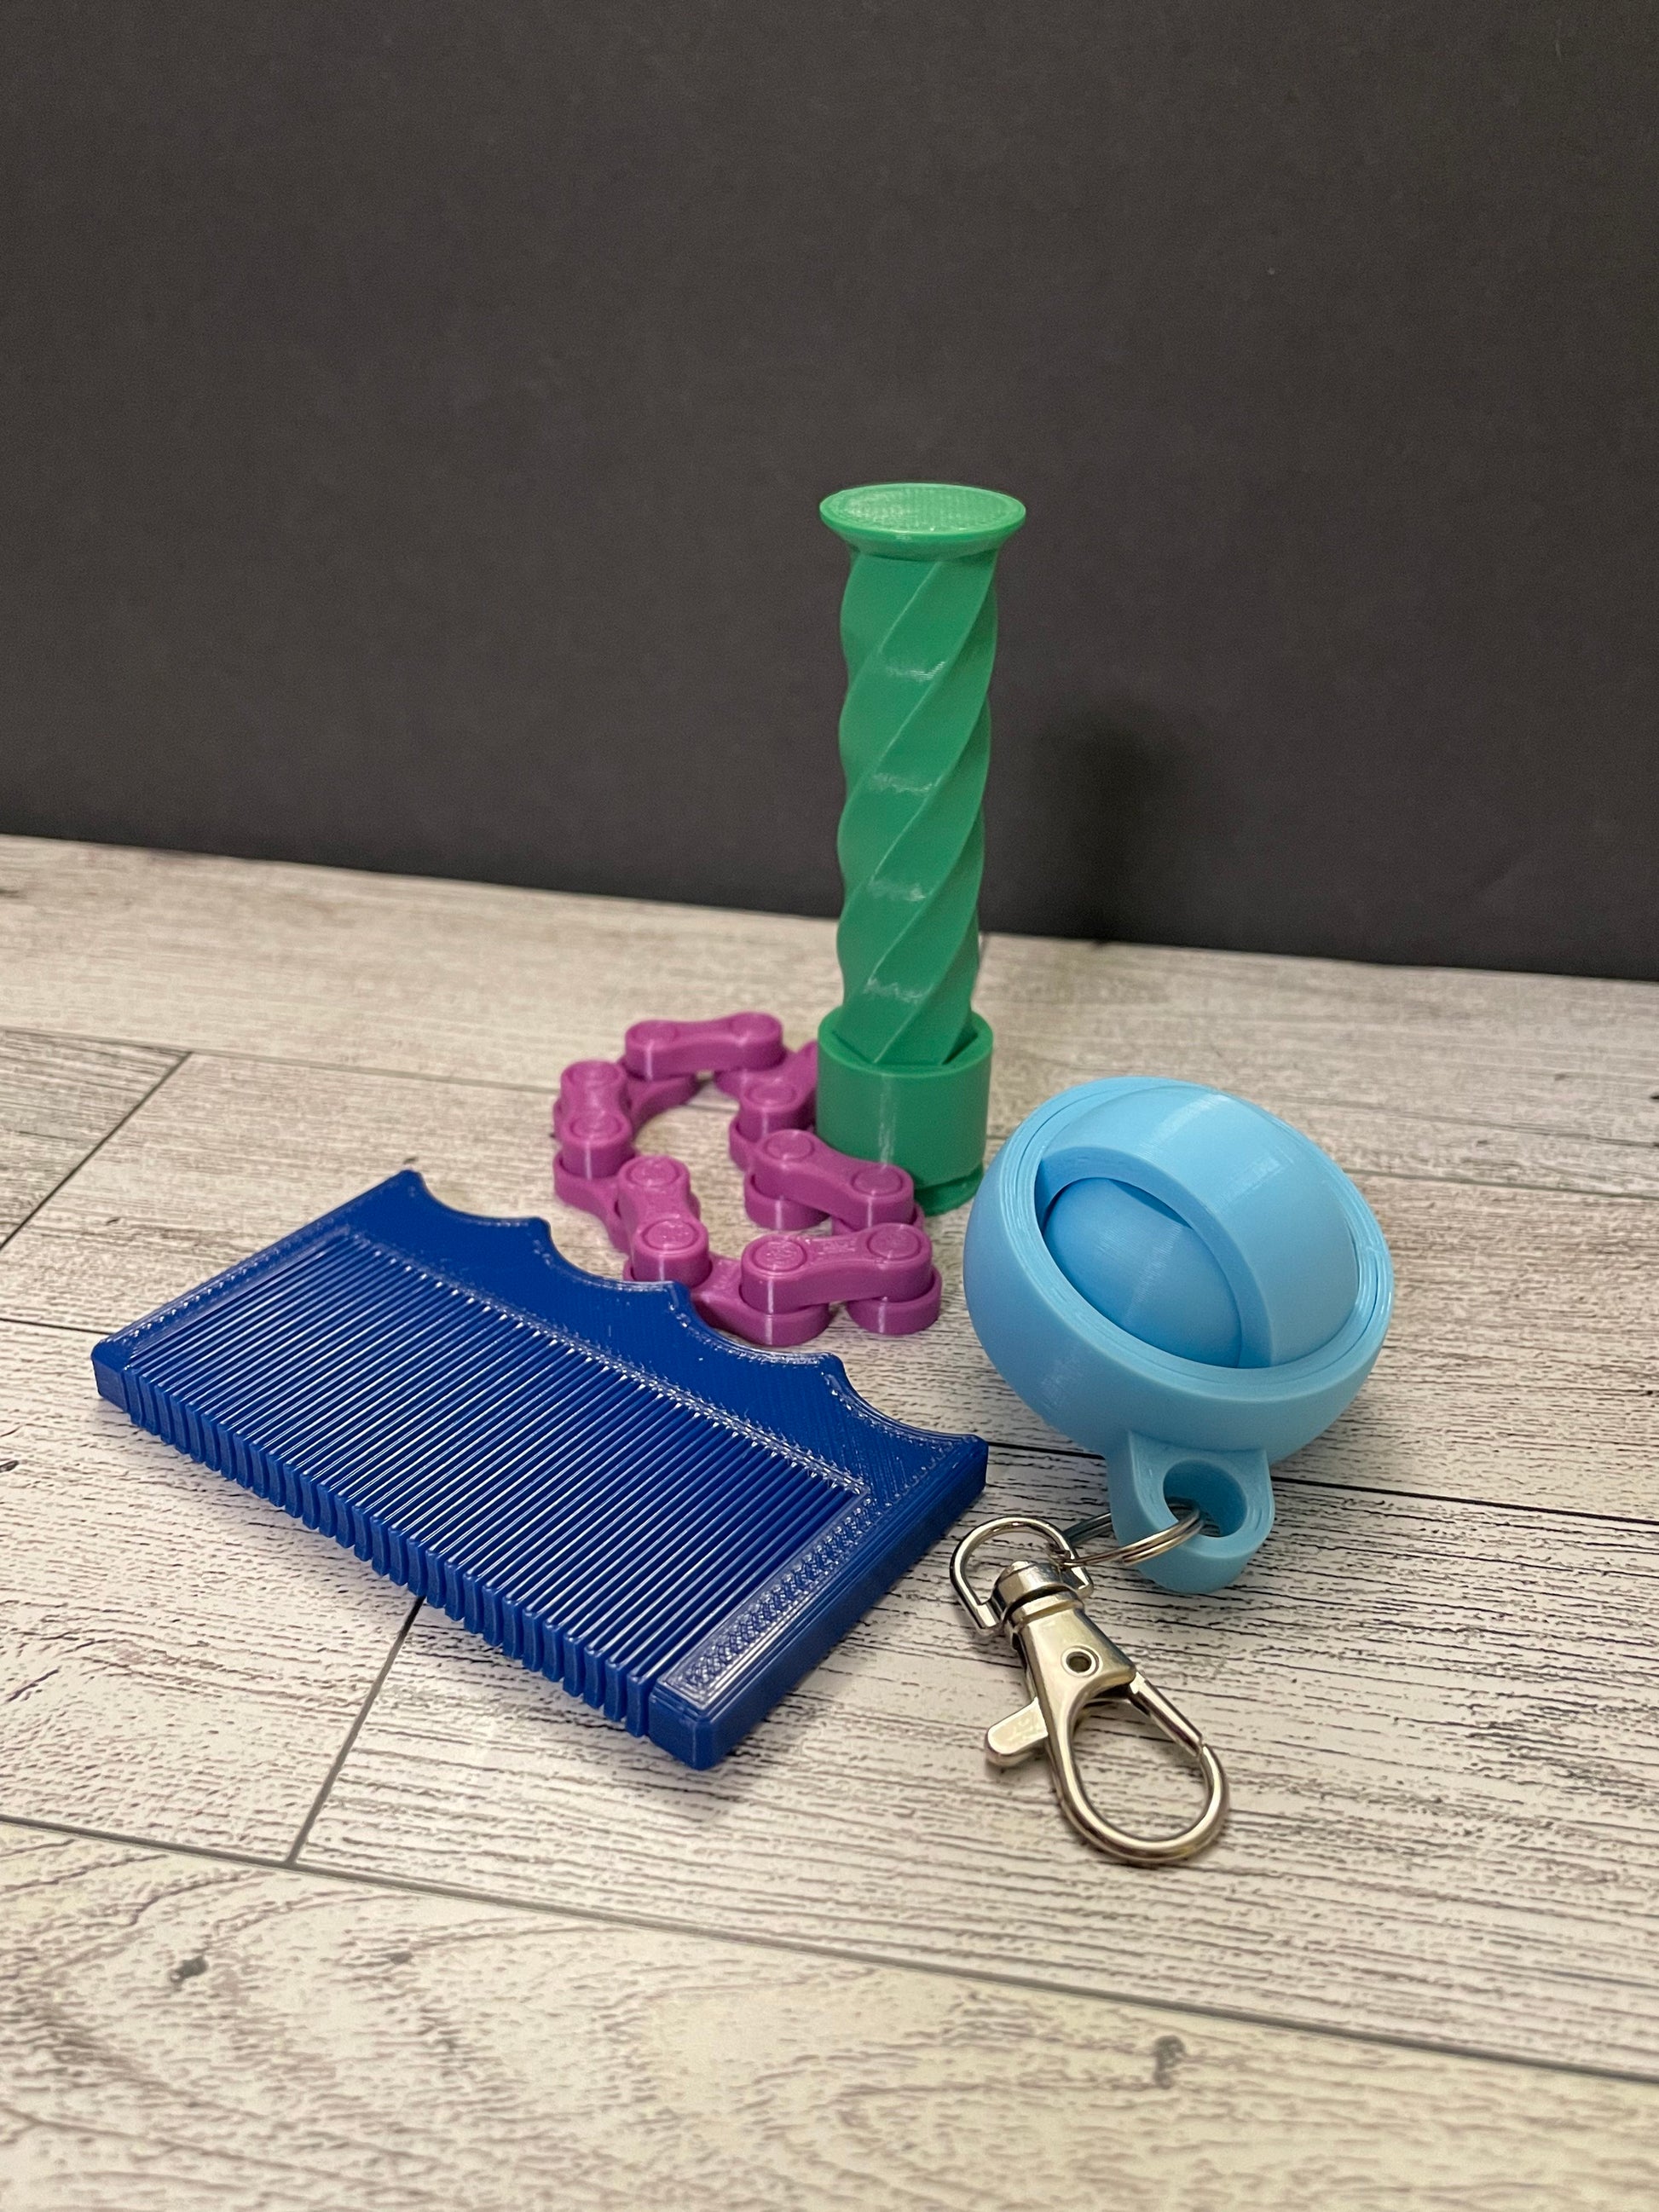 An image of a blue sensory comb, light blue small gyro fidget, purple medium chain fidget, and green spiral tower fidget. These are arranged on a light woodgrain table with a black backdrop.